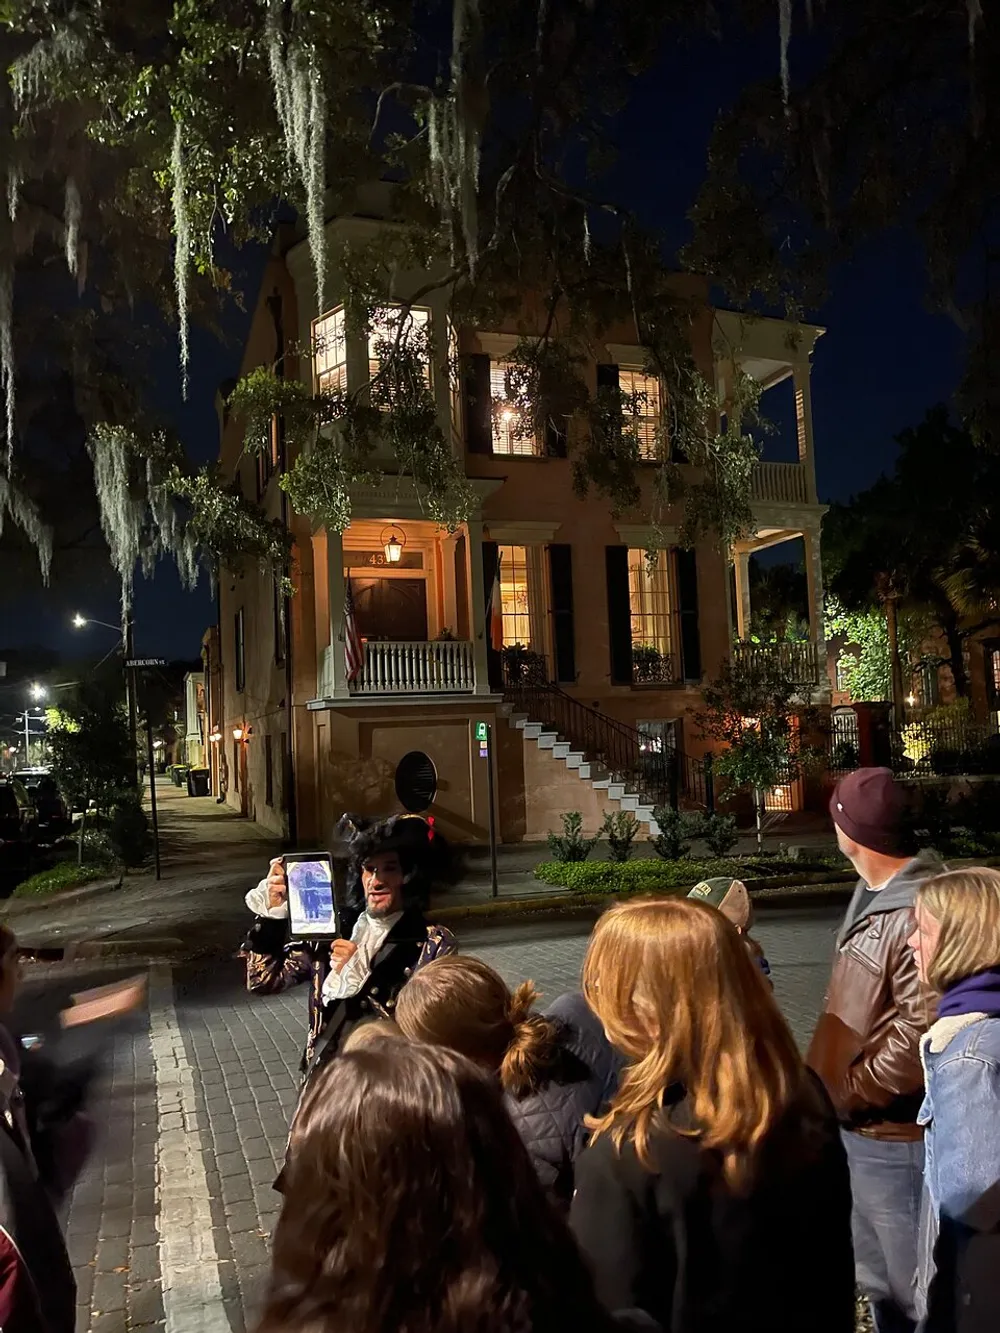 A group of people listen to a costumed guide during a nighttime walking tour in front of an illuminated historic building adorned with Spanish moss